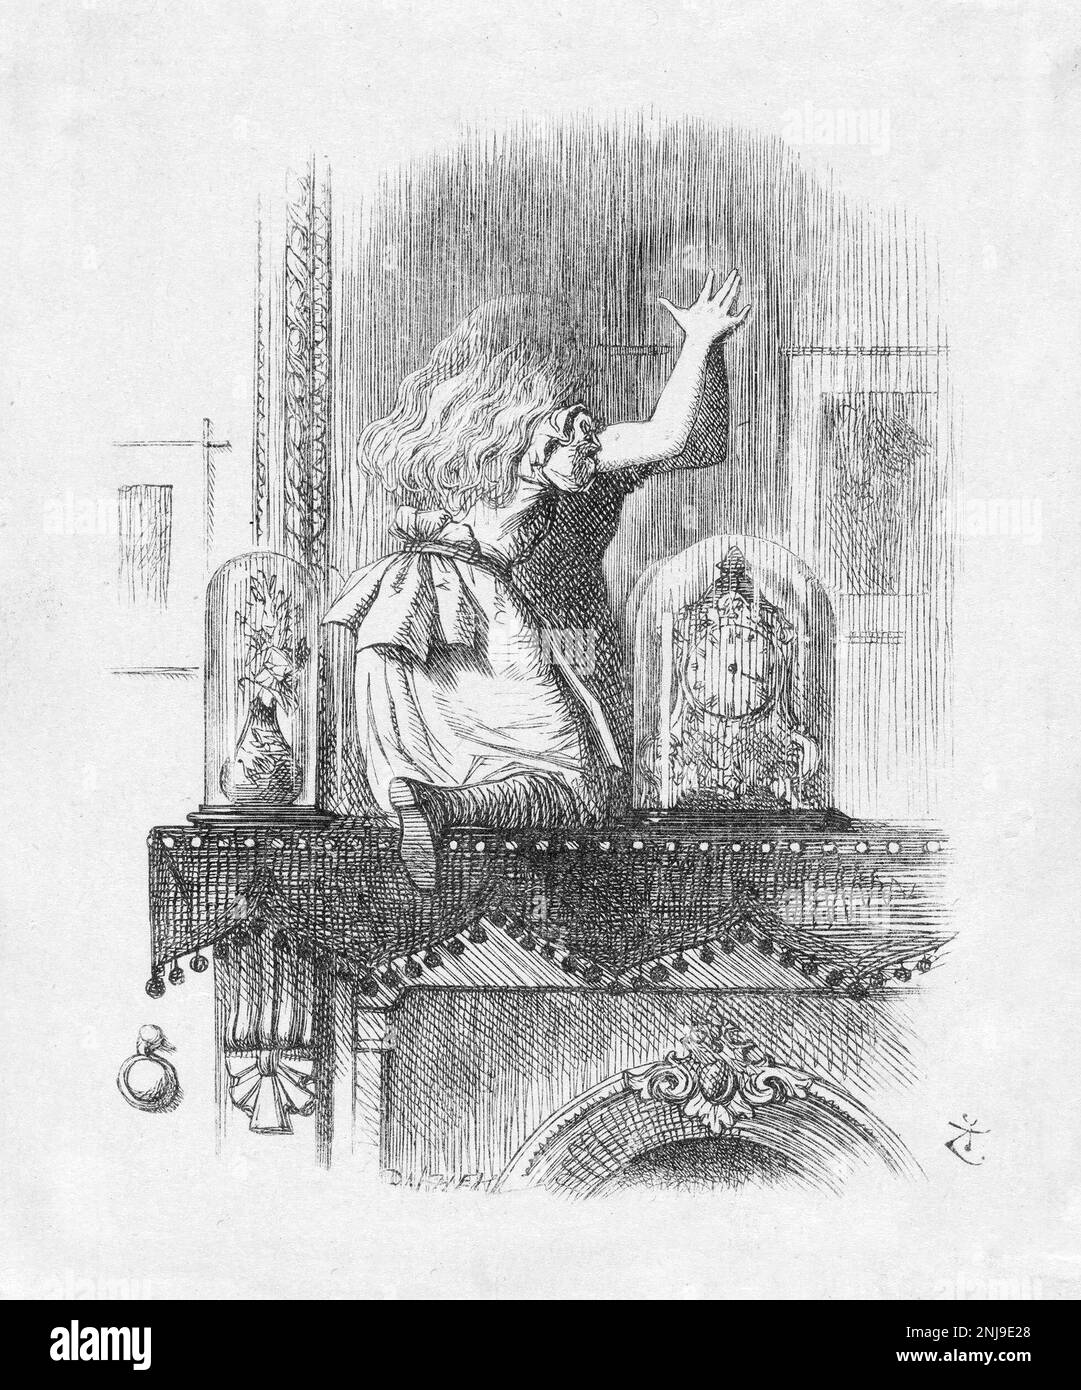 Alice at the Looking Glass, une illustration de Sir John Tenniel pour Lewis Carroll's « Through the Looking-Glass, and What Alice y trouva », gravure en bois, 1872 Banque D'Images